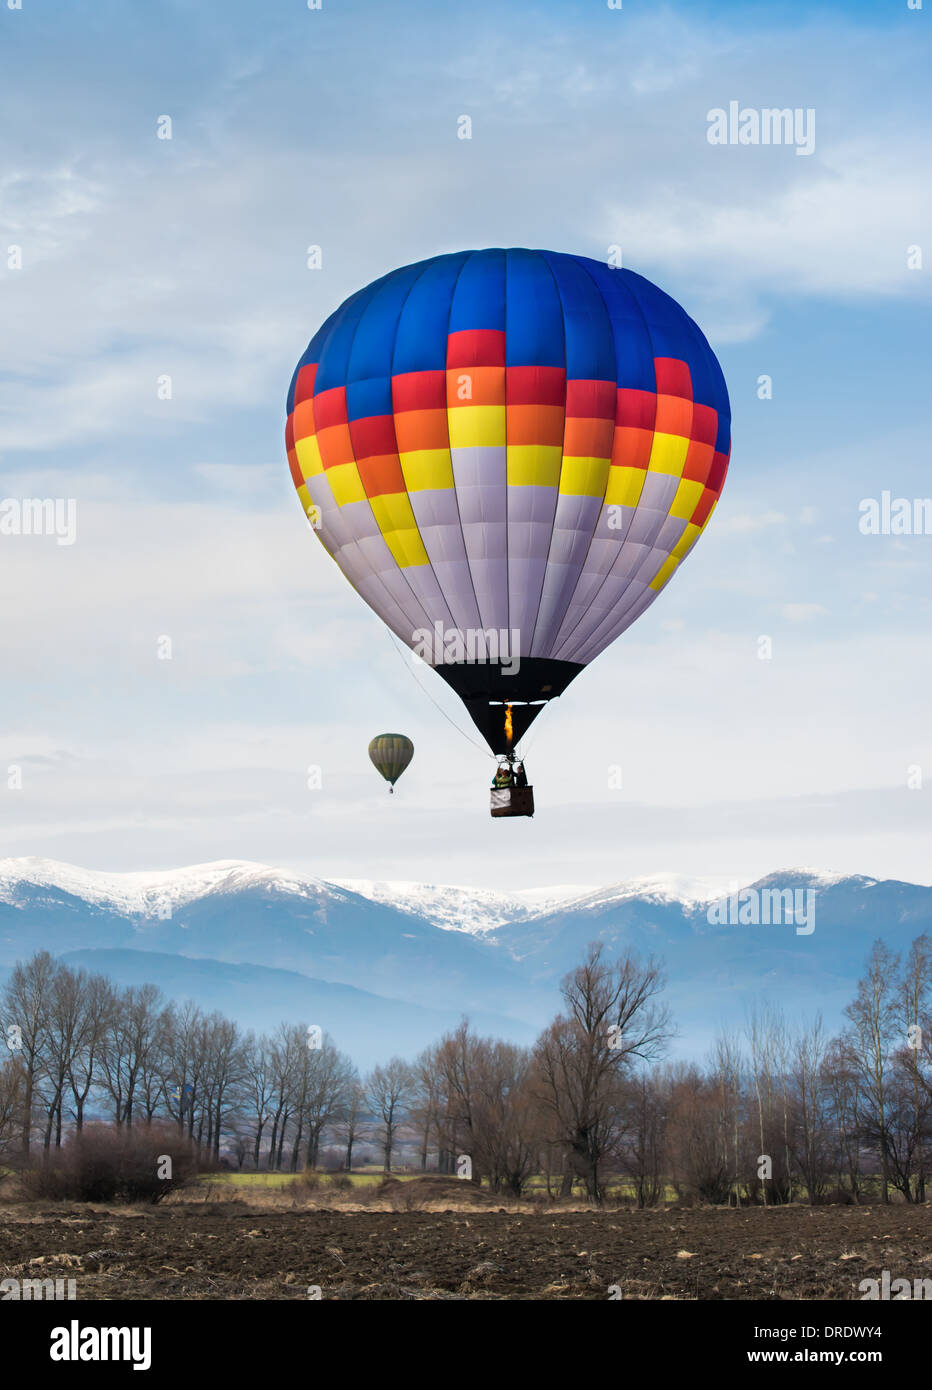 Multicolored Balloon in the blue cloudy sky. Mountain background Stock Photo